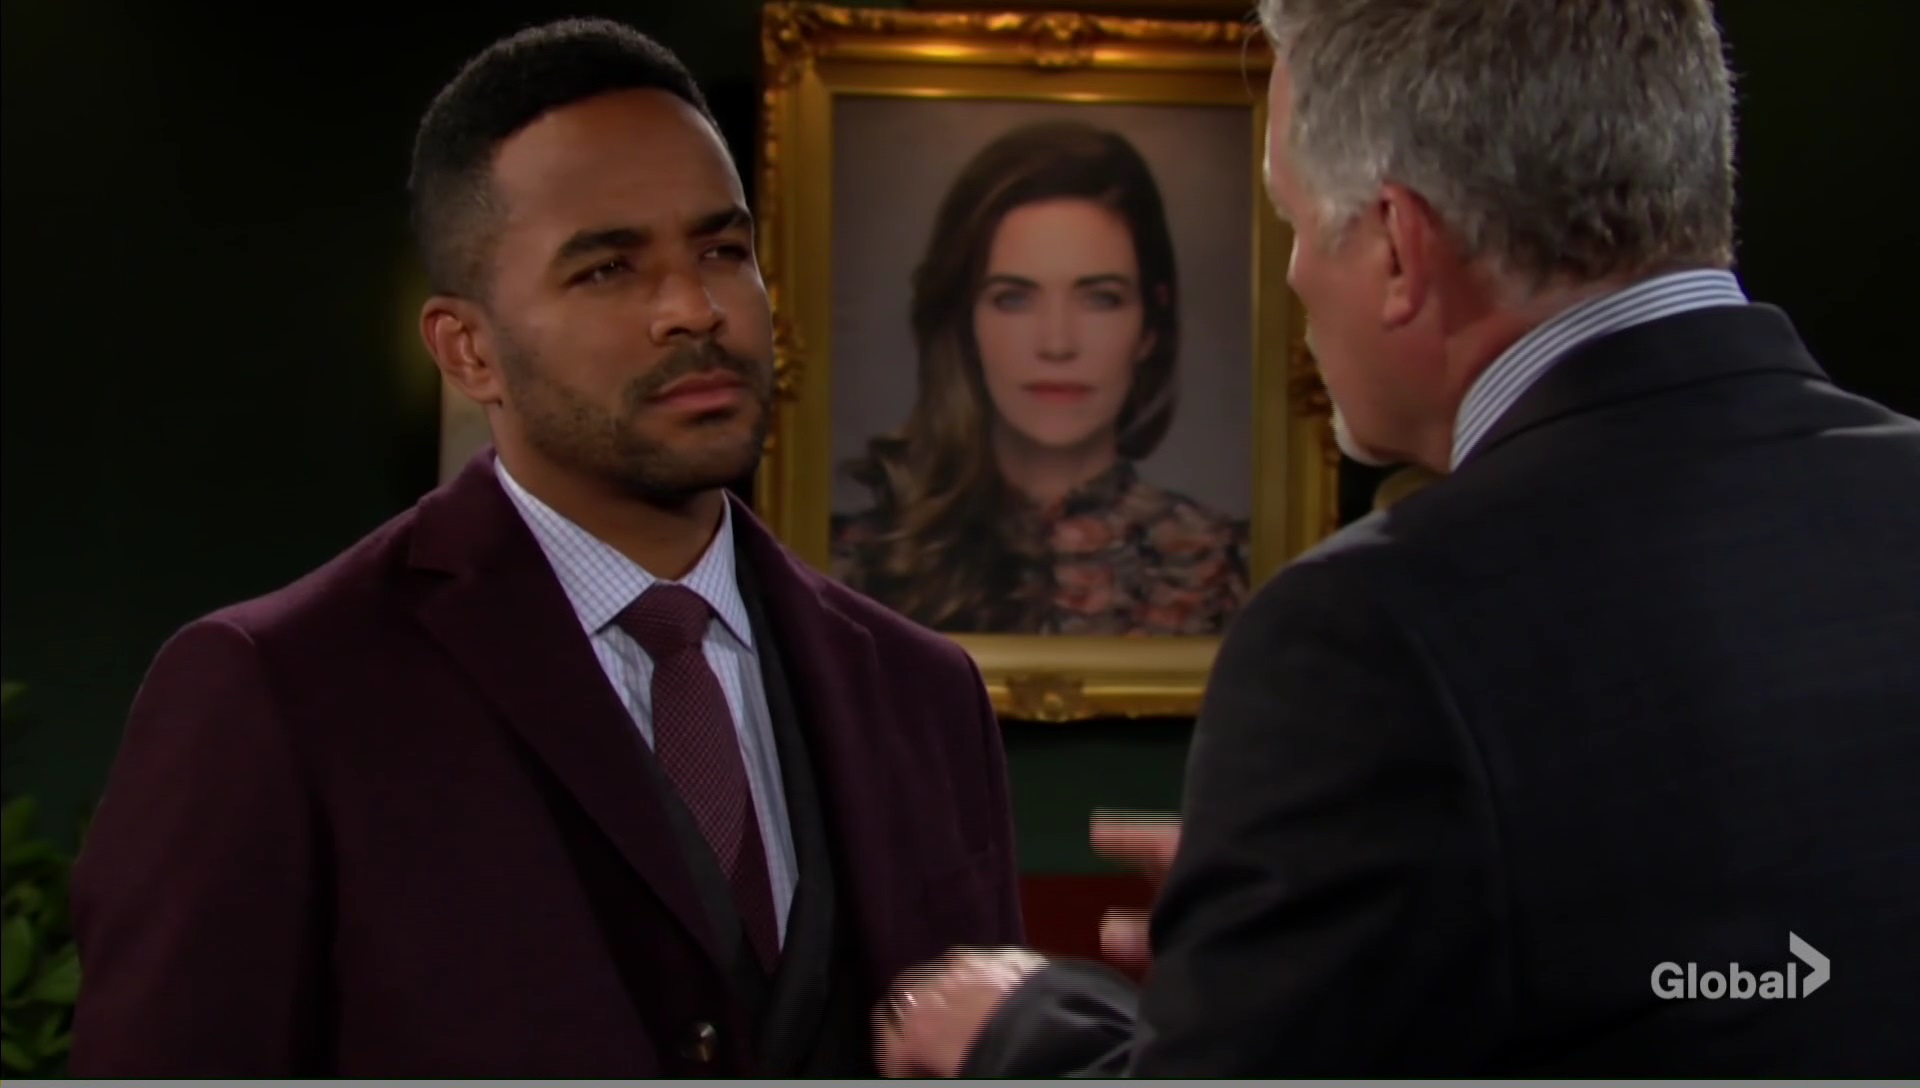 nate stares at locke liar young restless